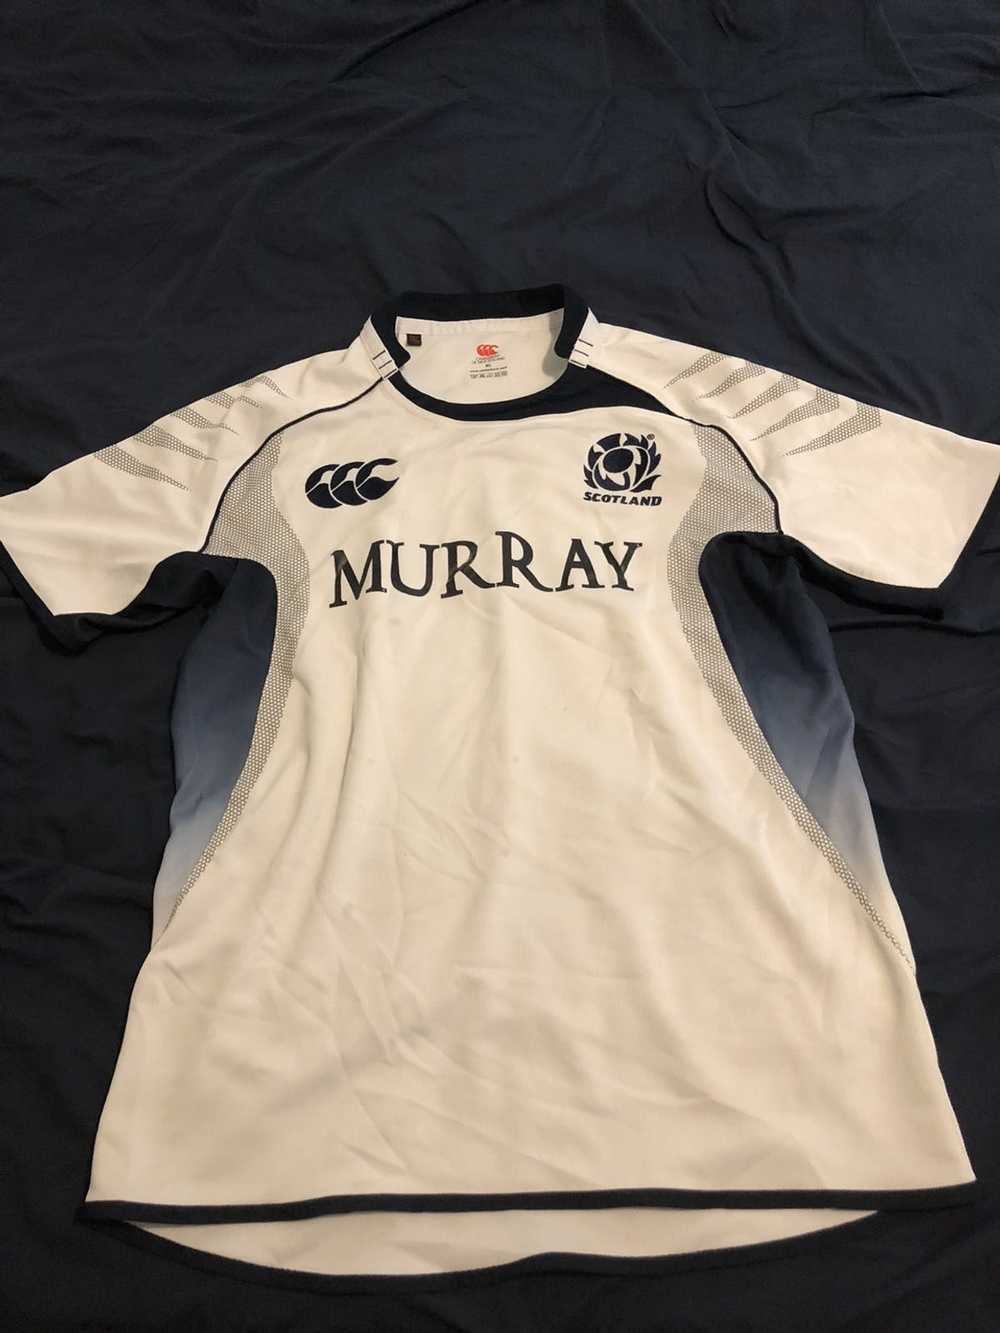 Canterbury Of New Zealand Scotland rugby jersey - image 1